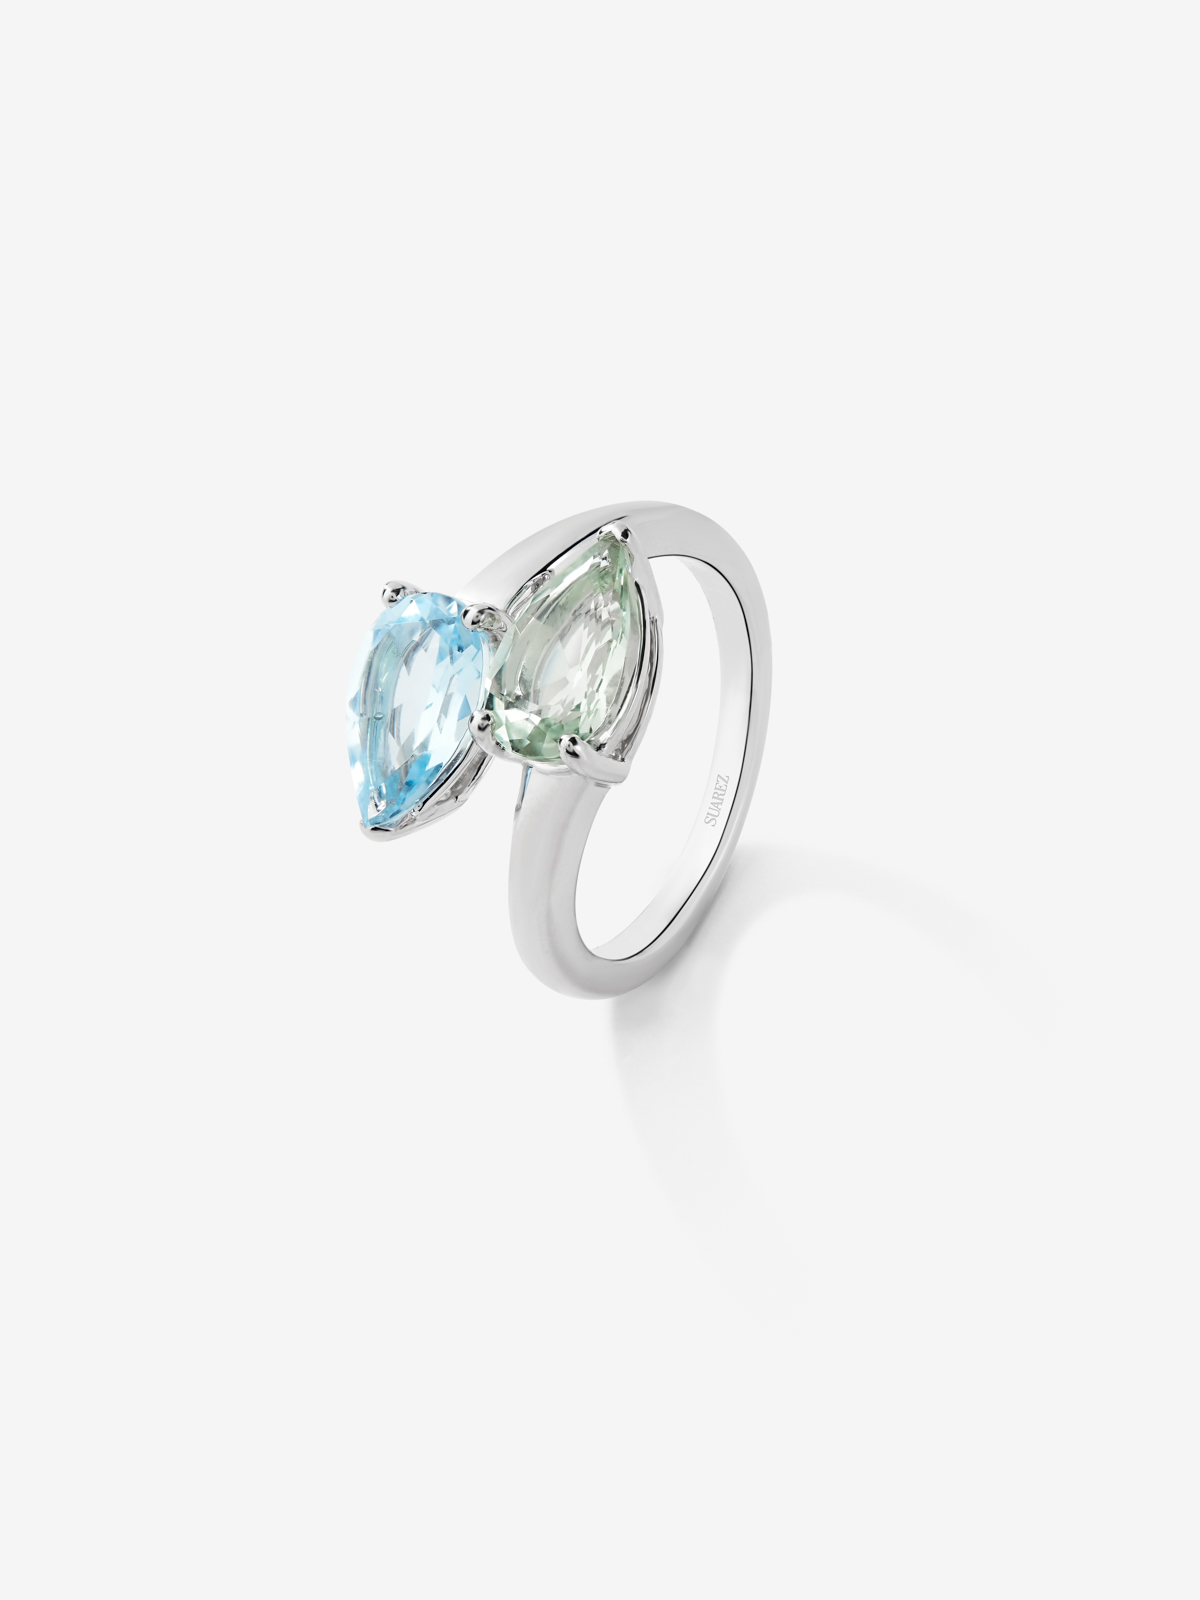 You and Me ring made of 925 silver with green amethyst and topaz.